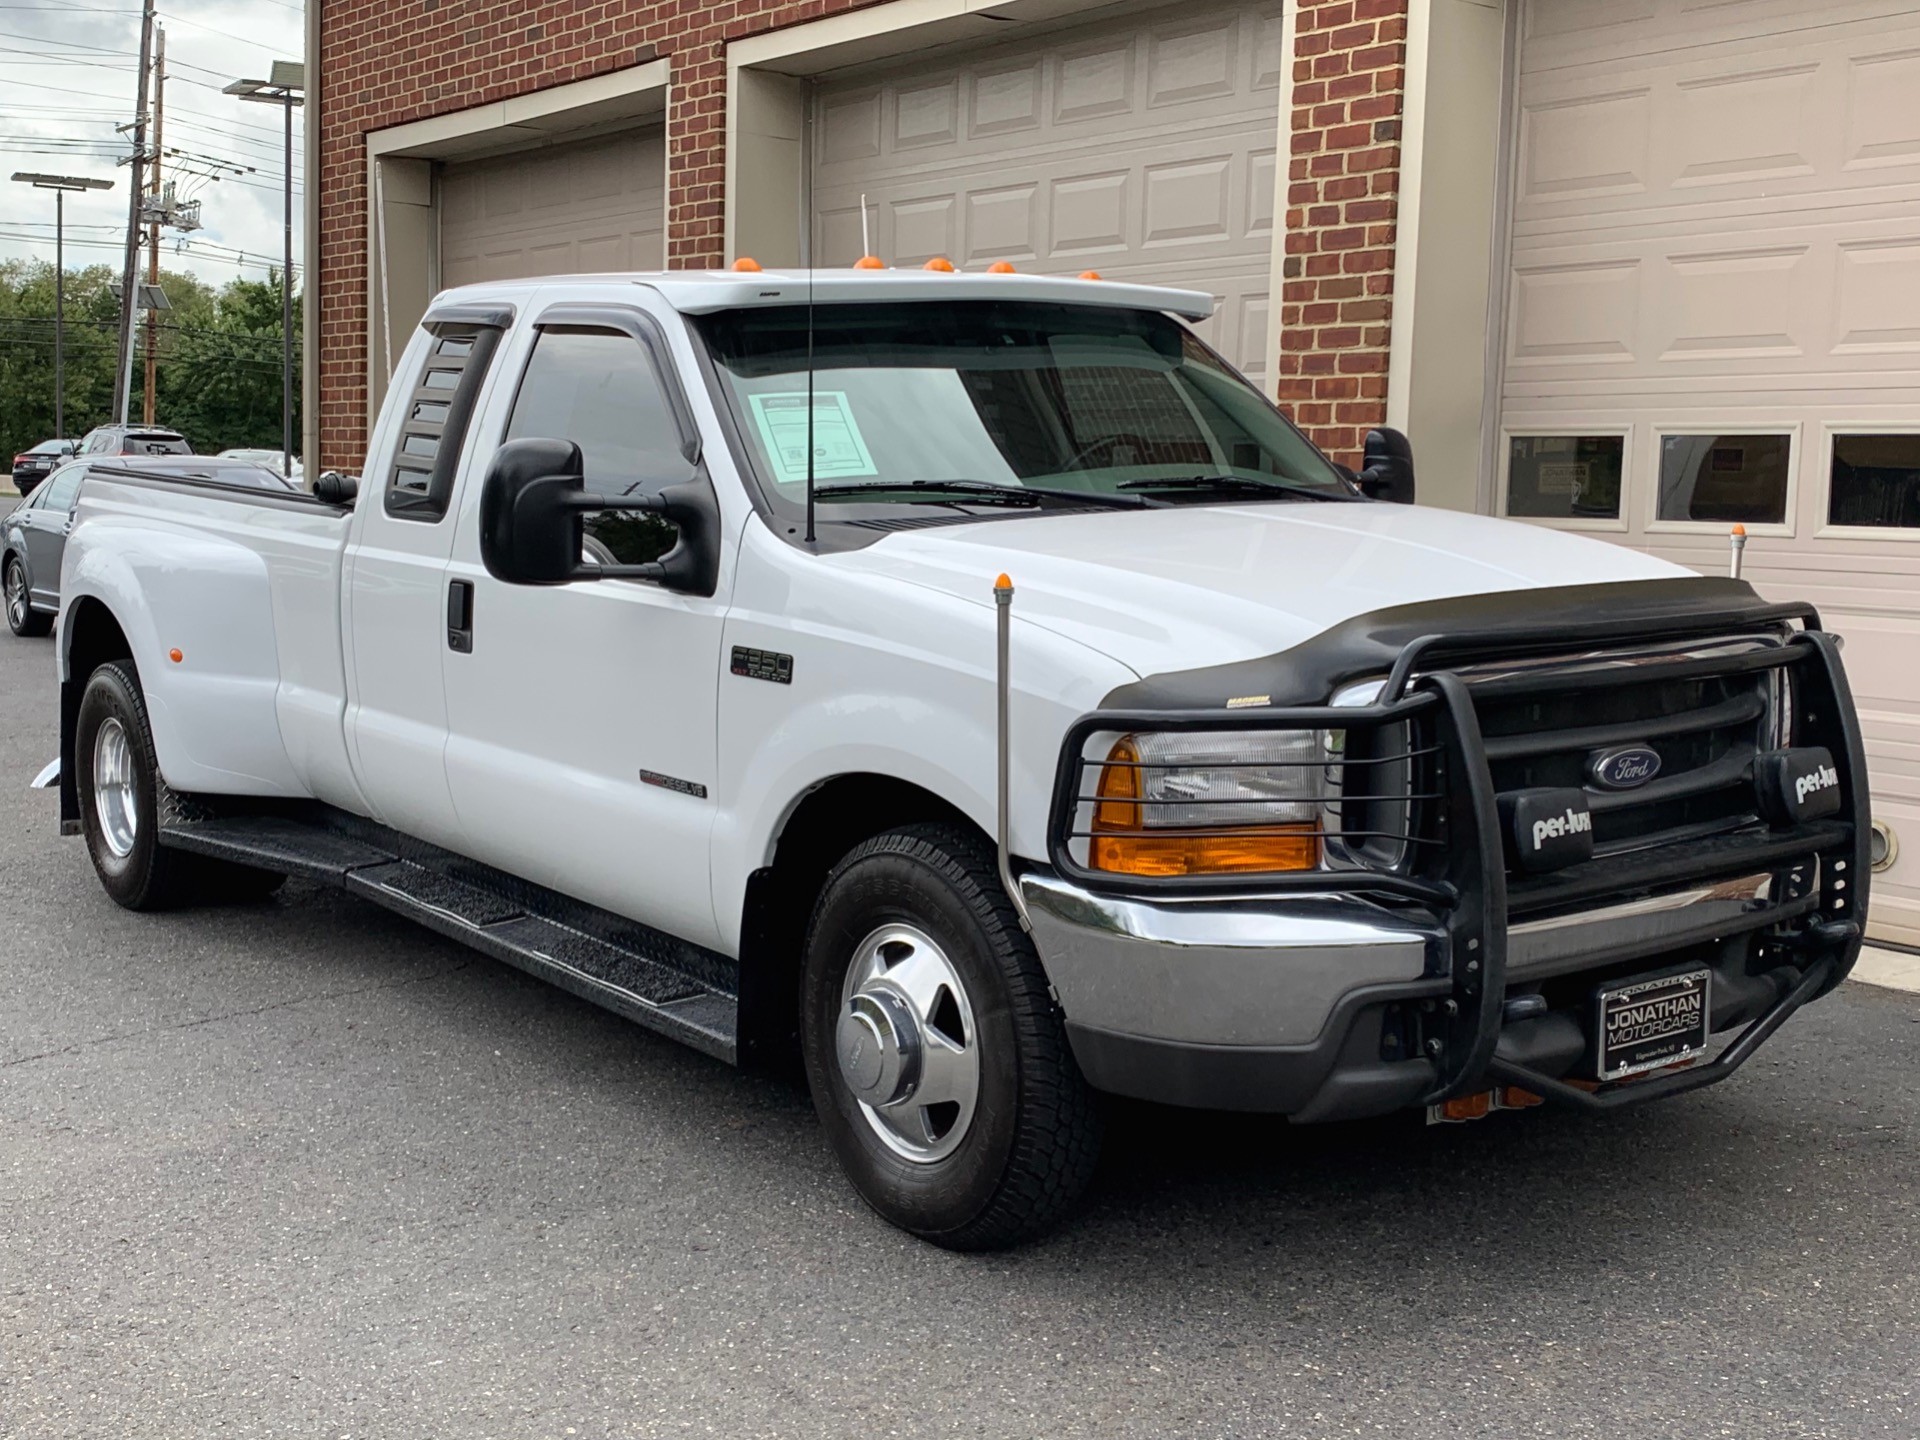 1999 FORD F-350